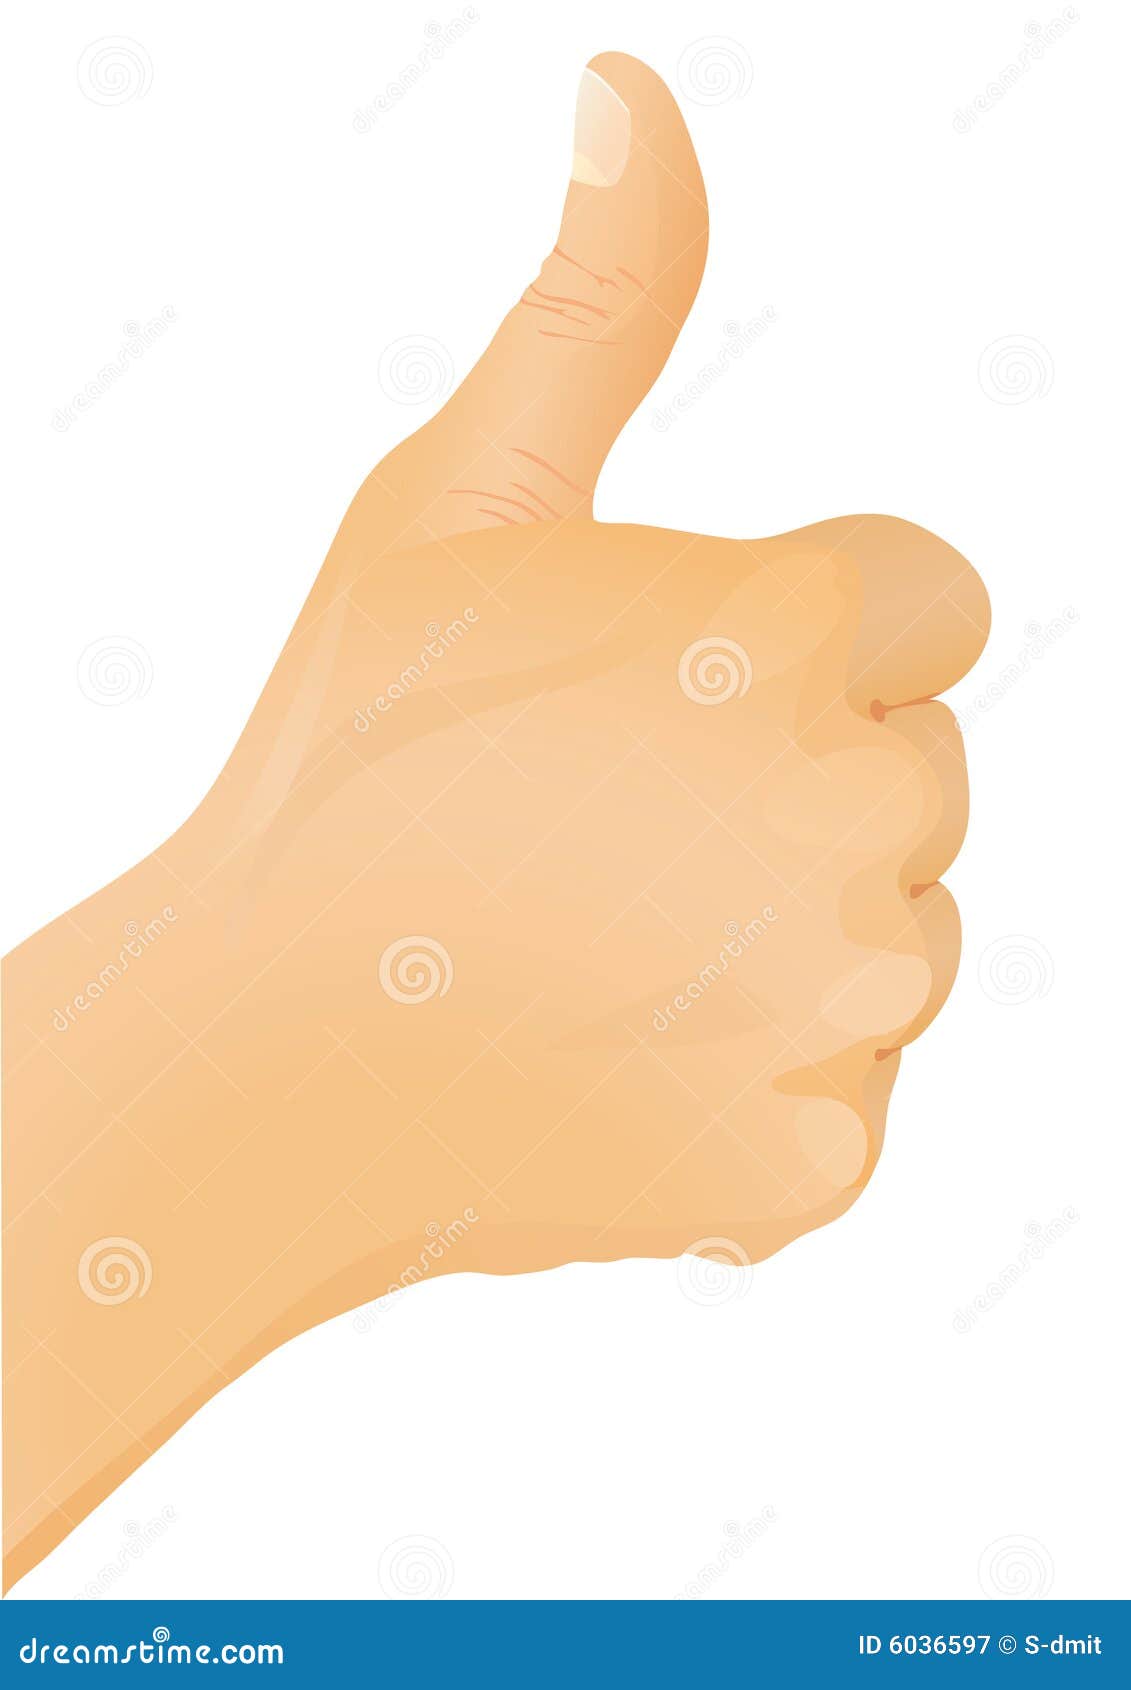 hand gesture - thumb up